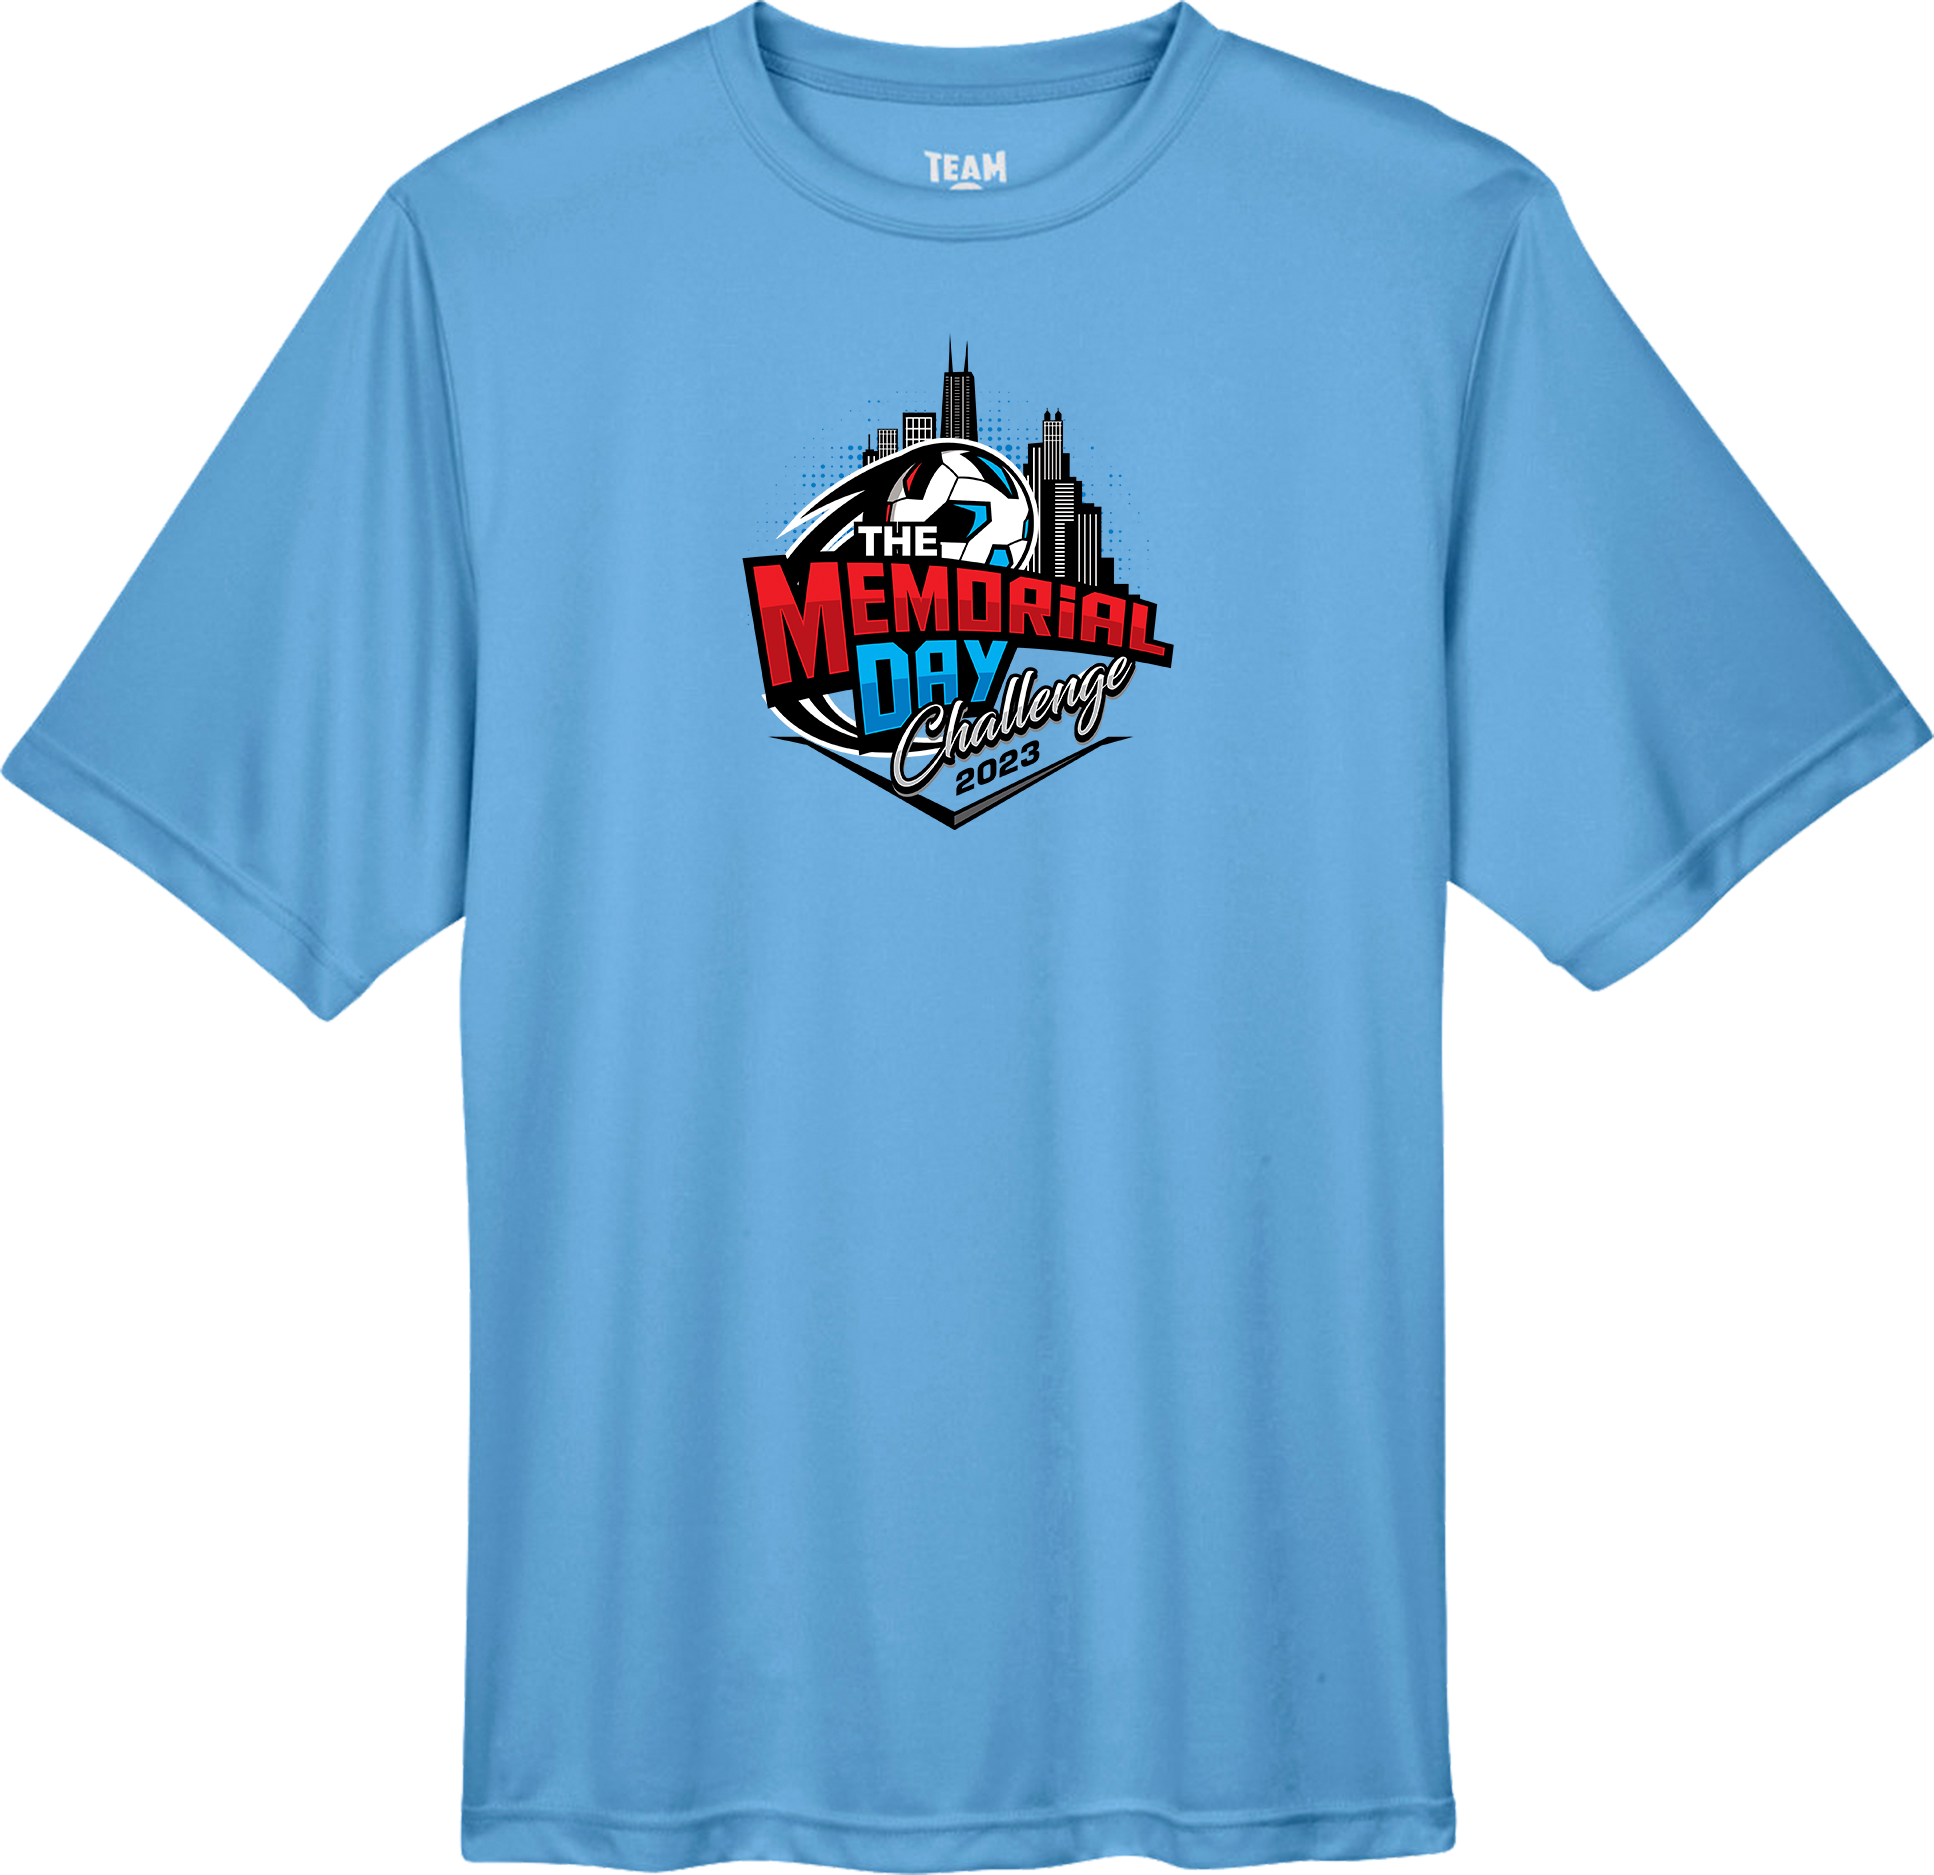 PERFORMANCE SHIRTS - 2023 The Memorial Day Challenge